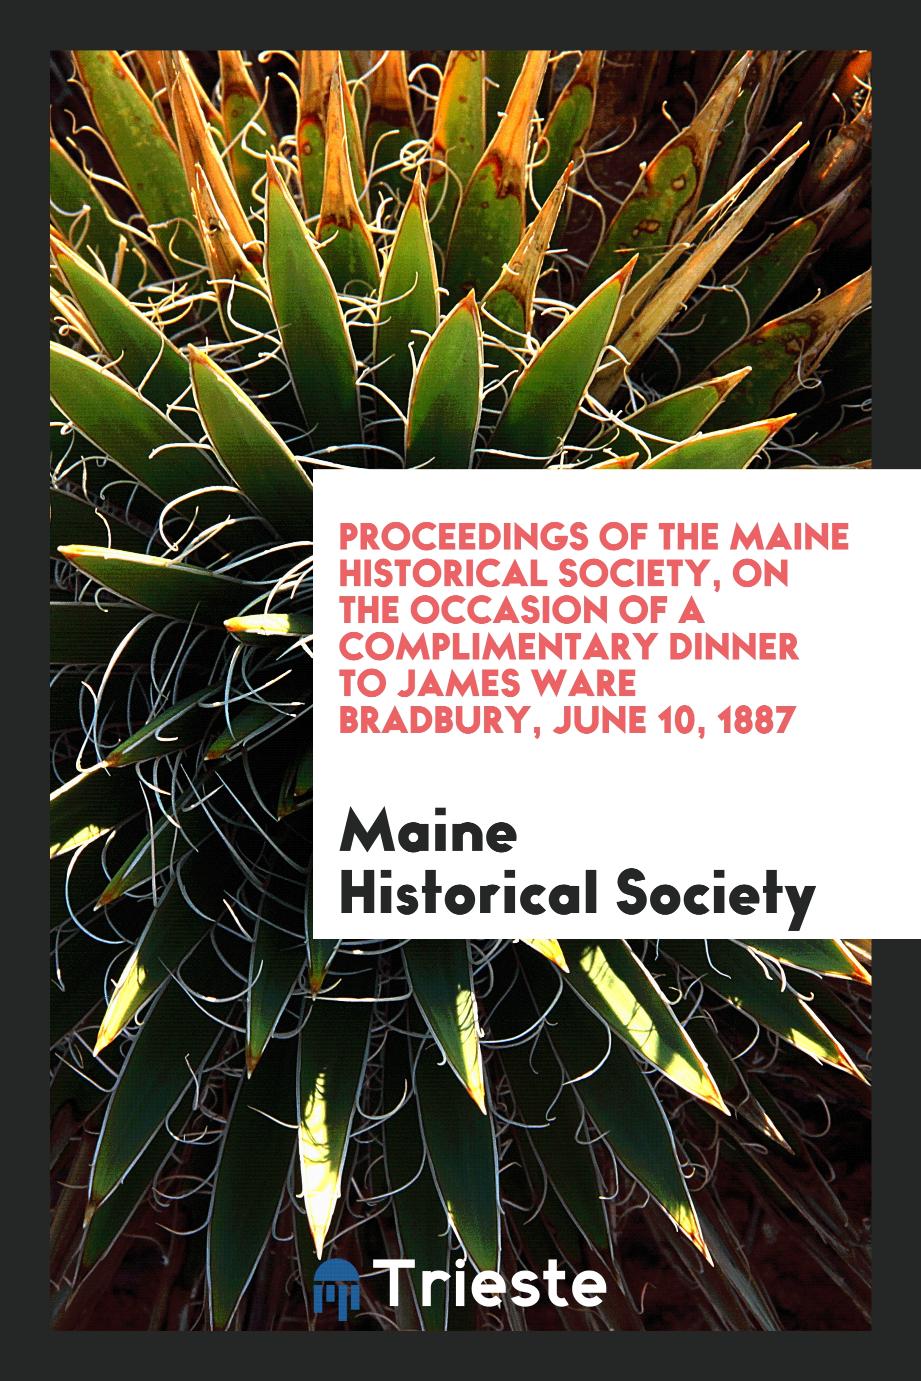 Proceedings of the Maine historical society, on the occasion of a complimentary dinner to James Ware Bradbury, June 10, 1887